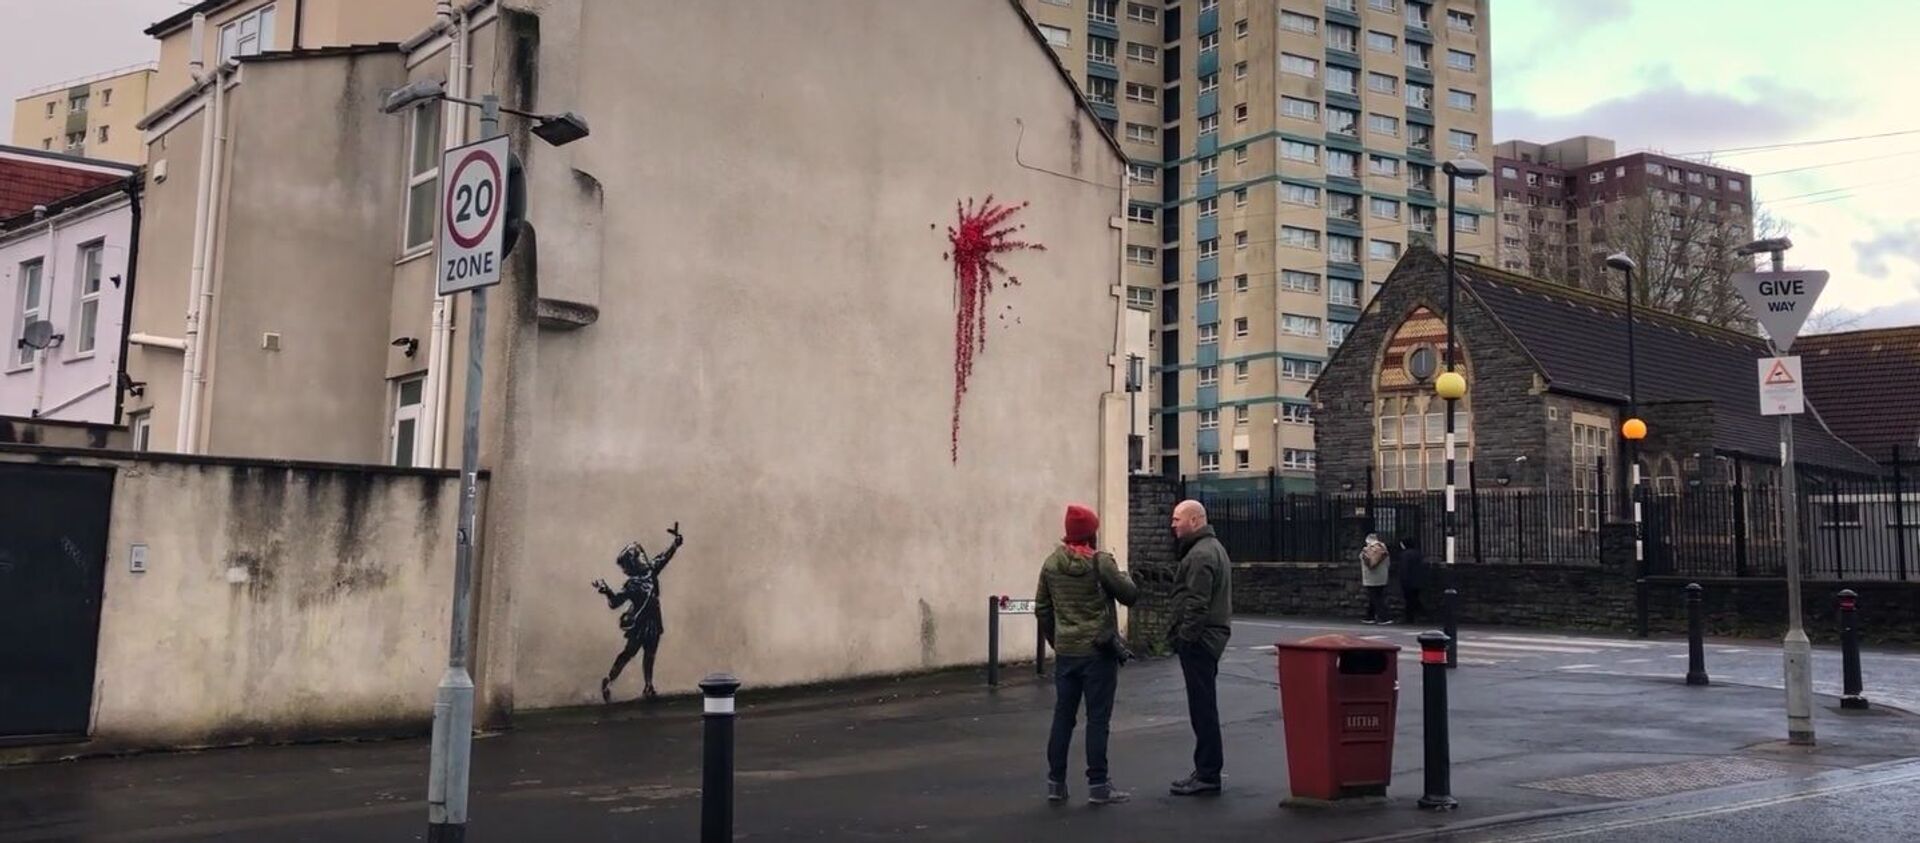 Suspected Banksy artwork has appeared in his home city of Bristol | SWNS - Sputnik International, 1920, 09.06.2020